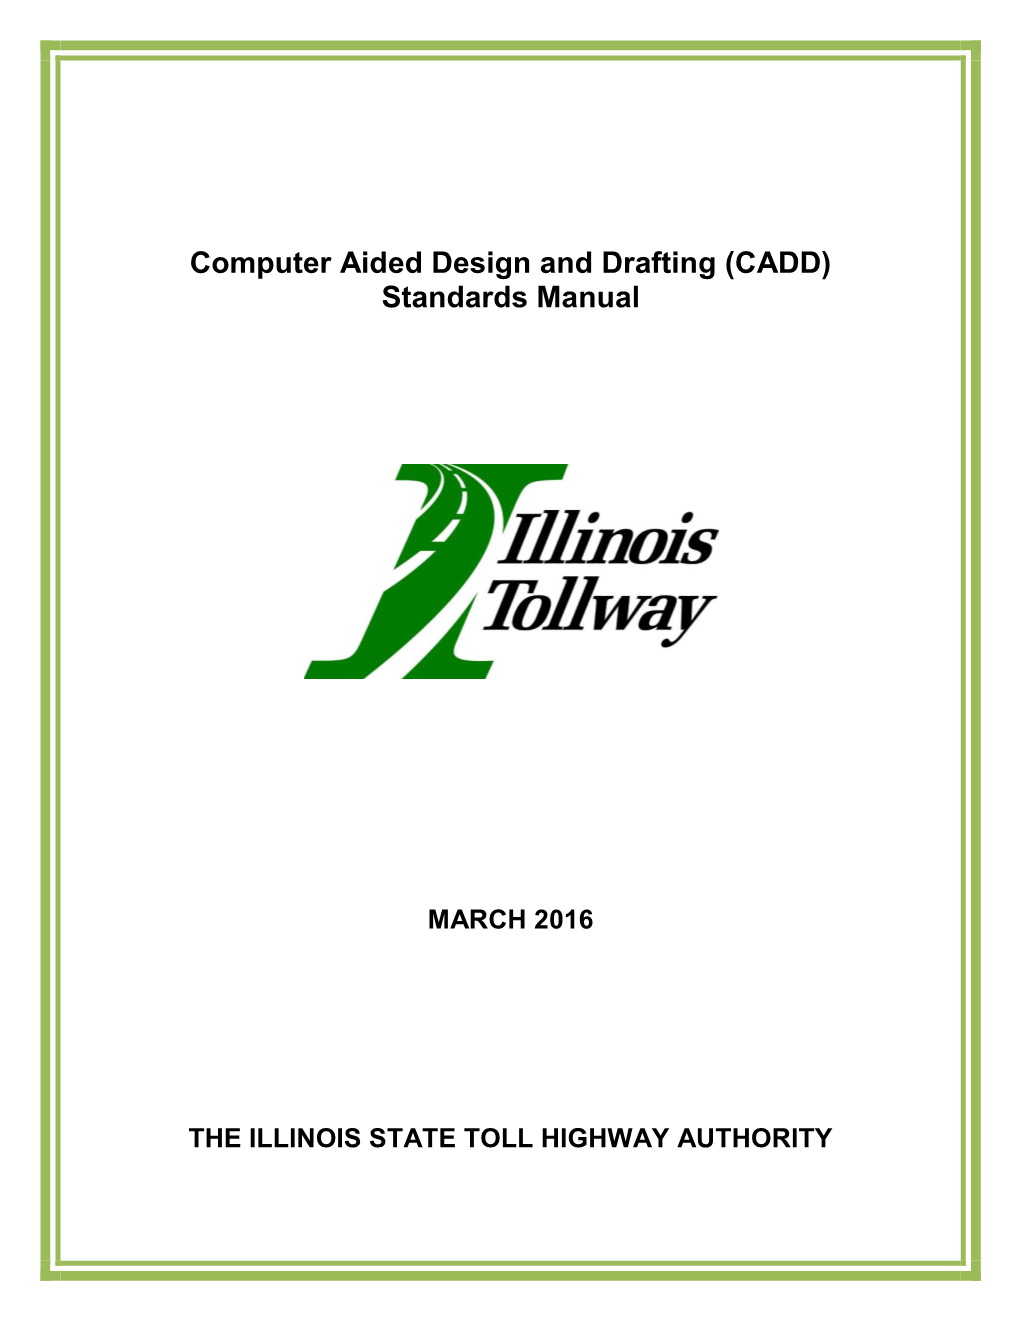 Computer Aided Design and Drafting (CADD) Standards Manual